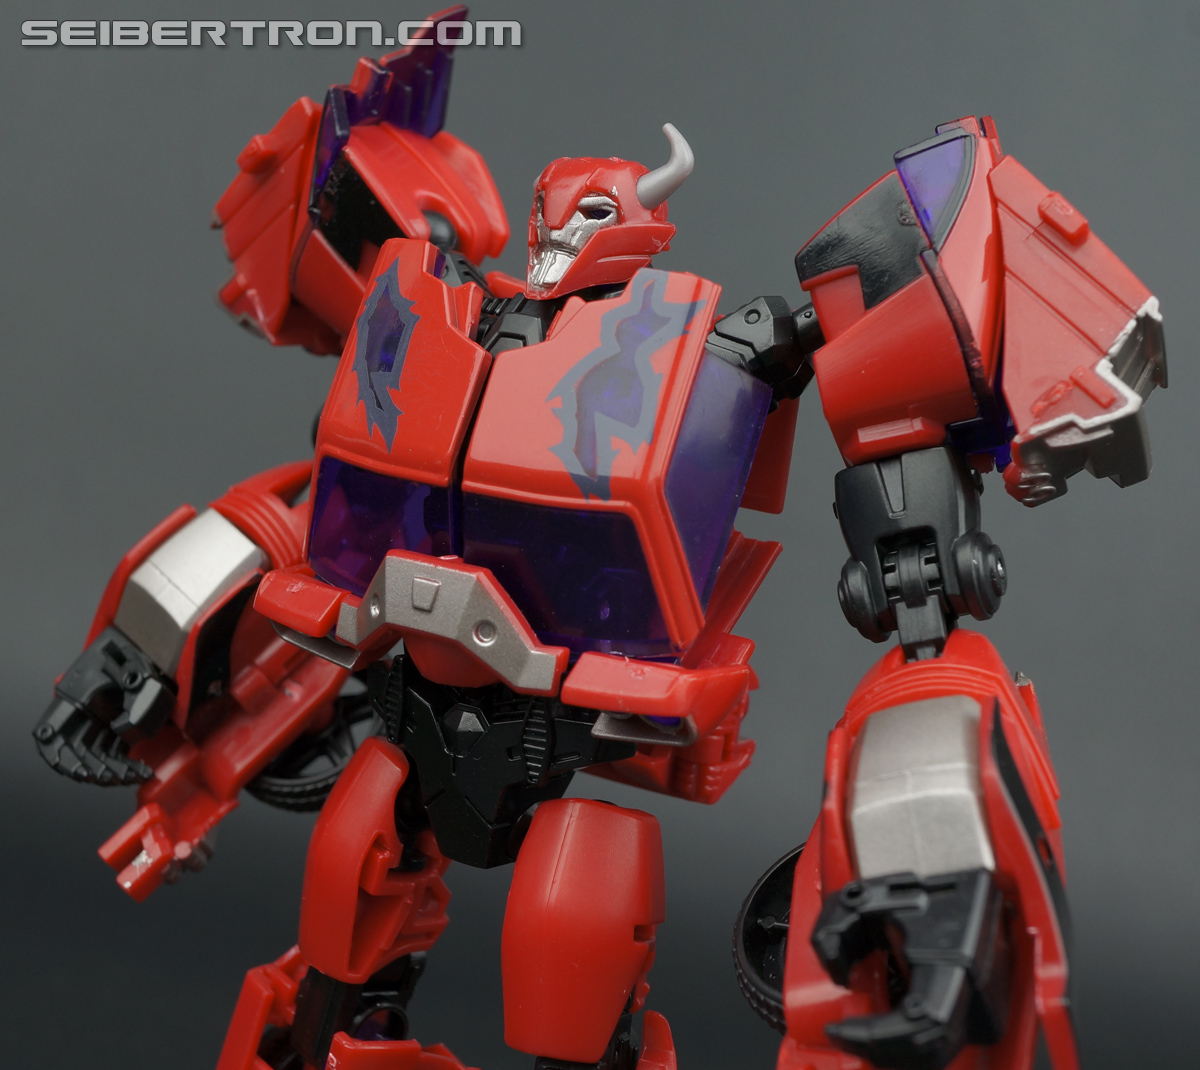 Transformers Prime: First Edition Terrorcon Cliffjumper (Image #82 of 179)